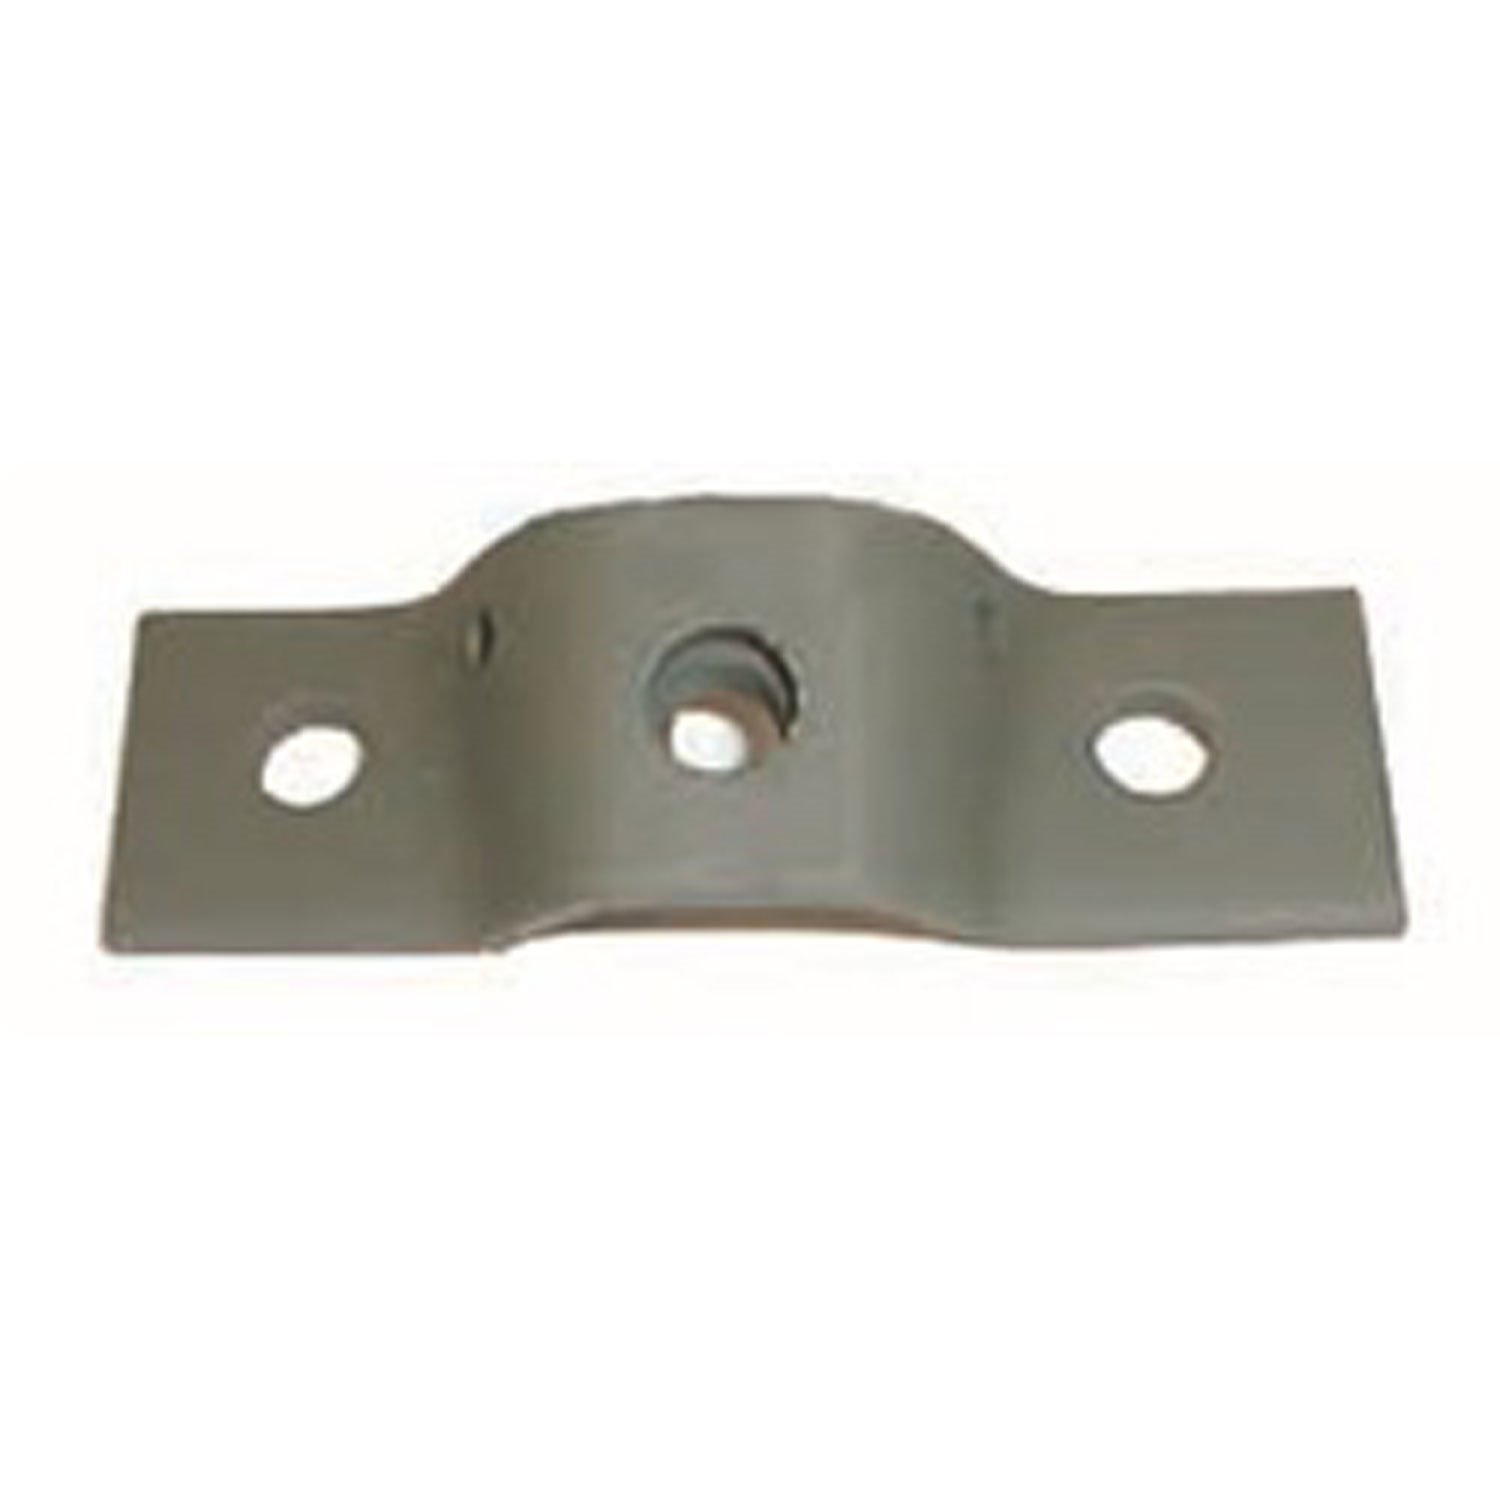 This windshield pivot bracket from Omix-ADA fits 41-64 Ford and Willys models. It bolts to the side